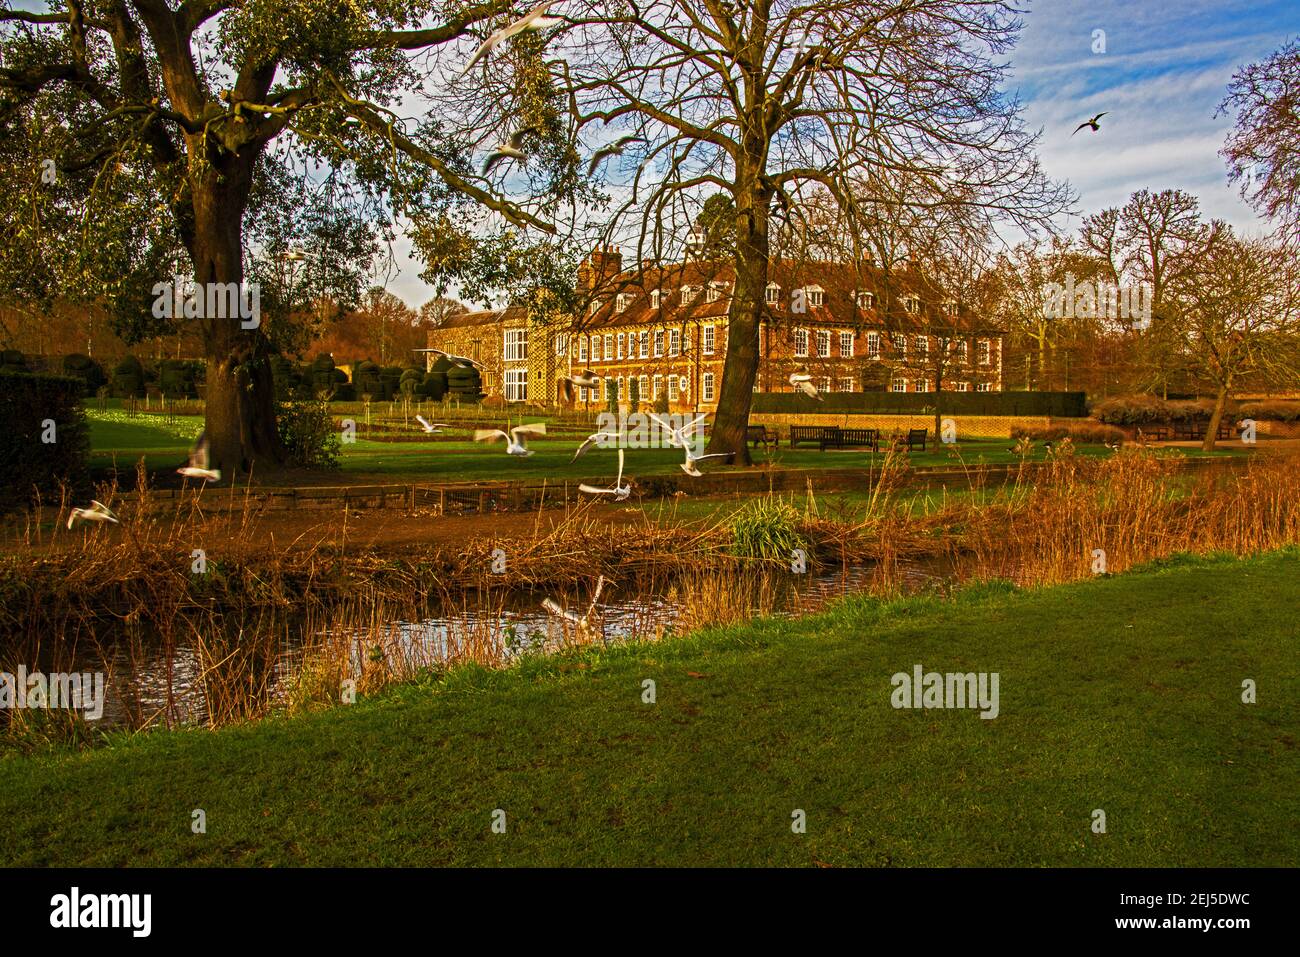 Black Headed Gulls over R.Cray at Hall Place, Bexley. Stock Photo